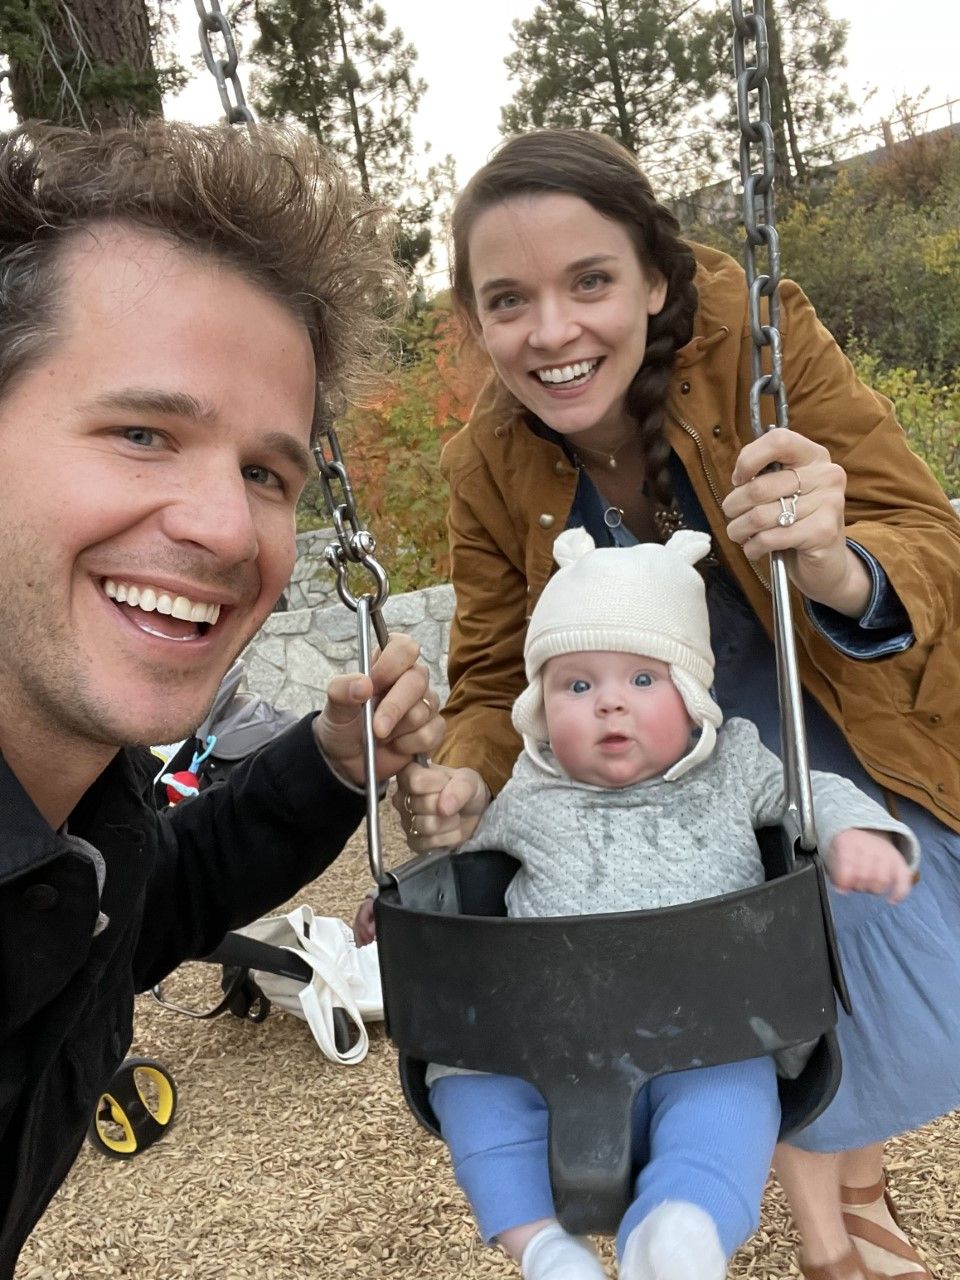 carly leahy with her husband charlie and their baby tavie sitting in a swing